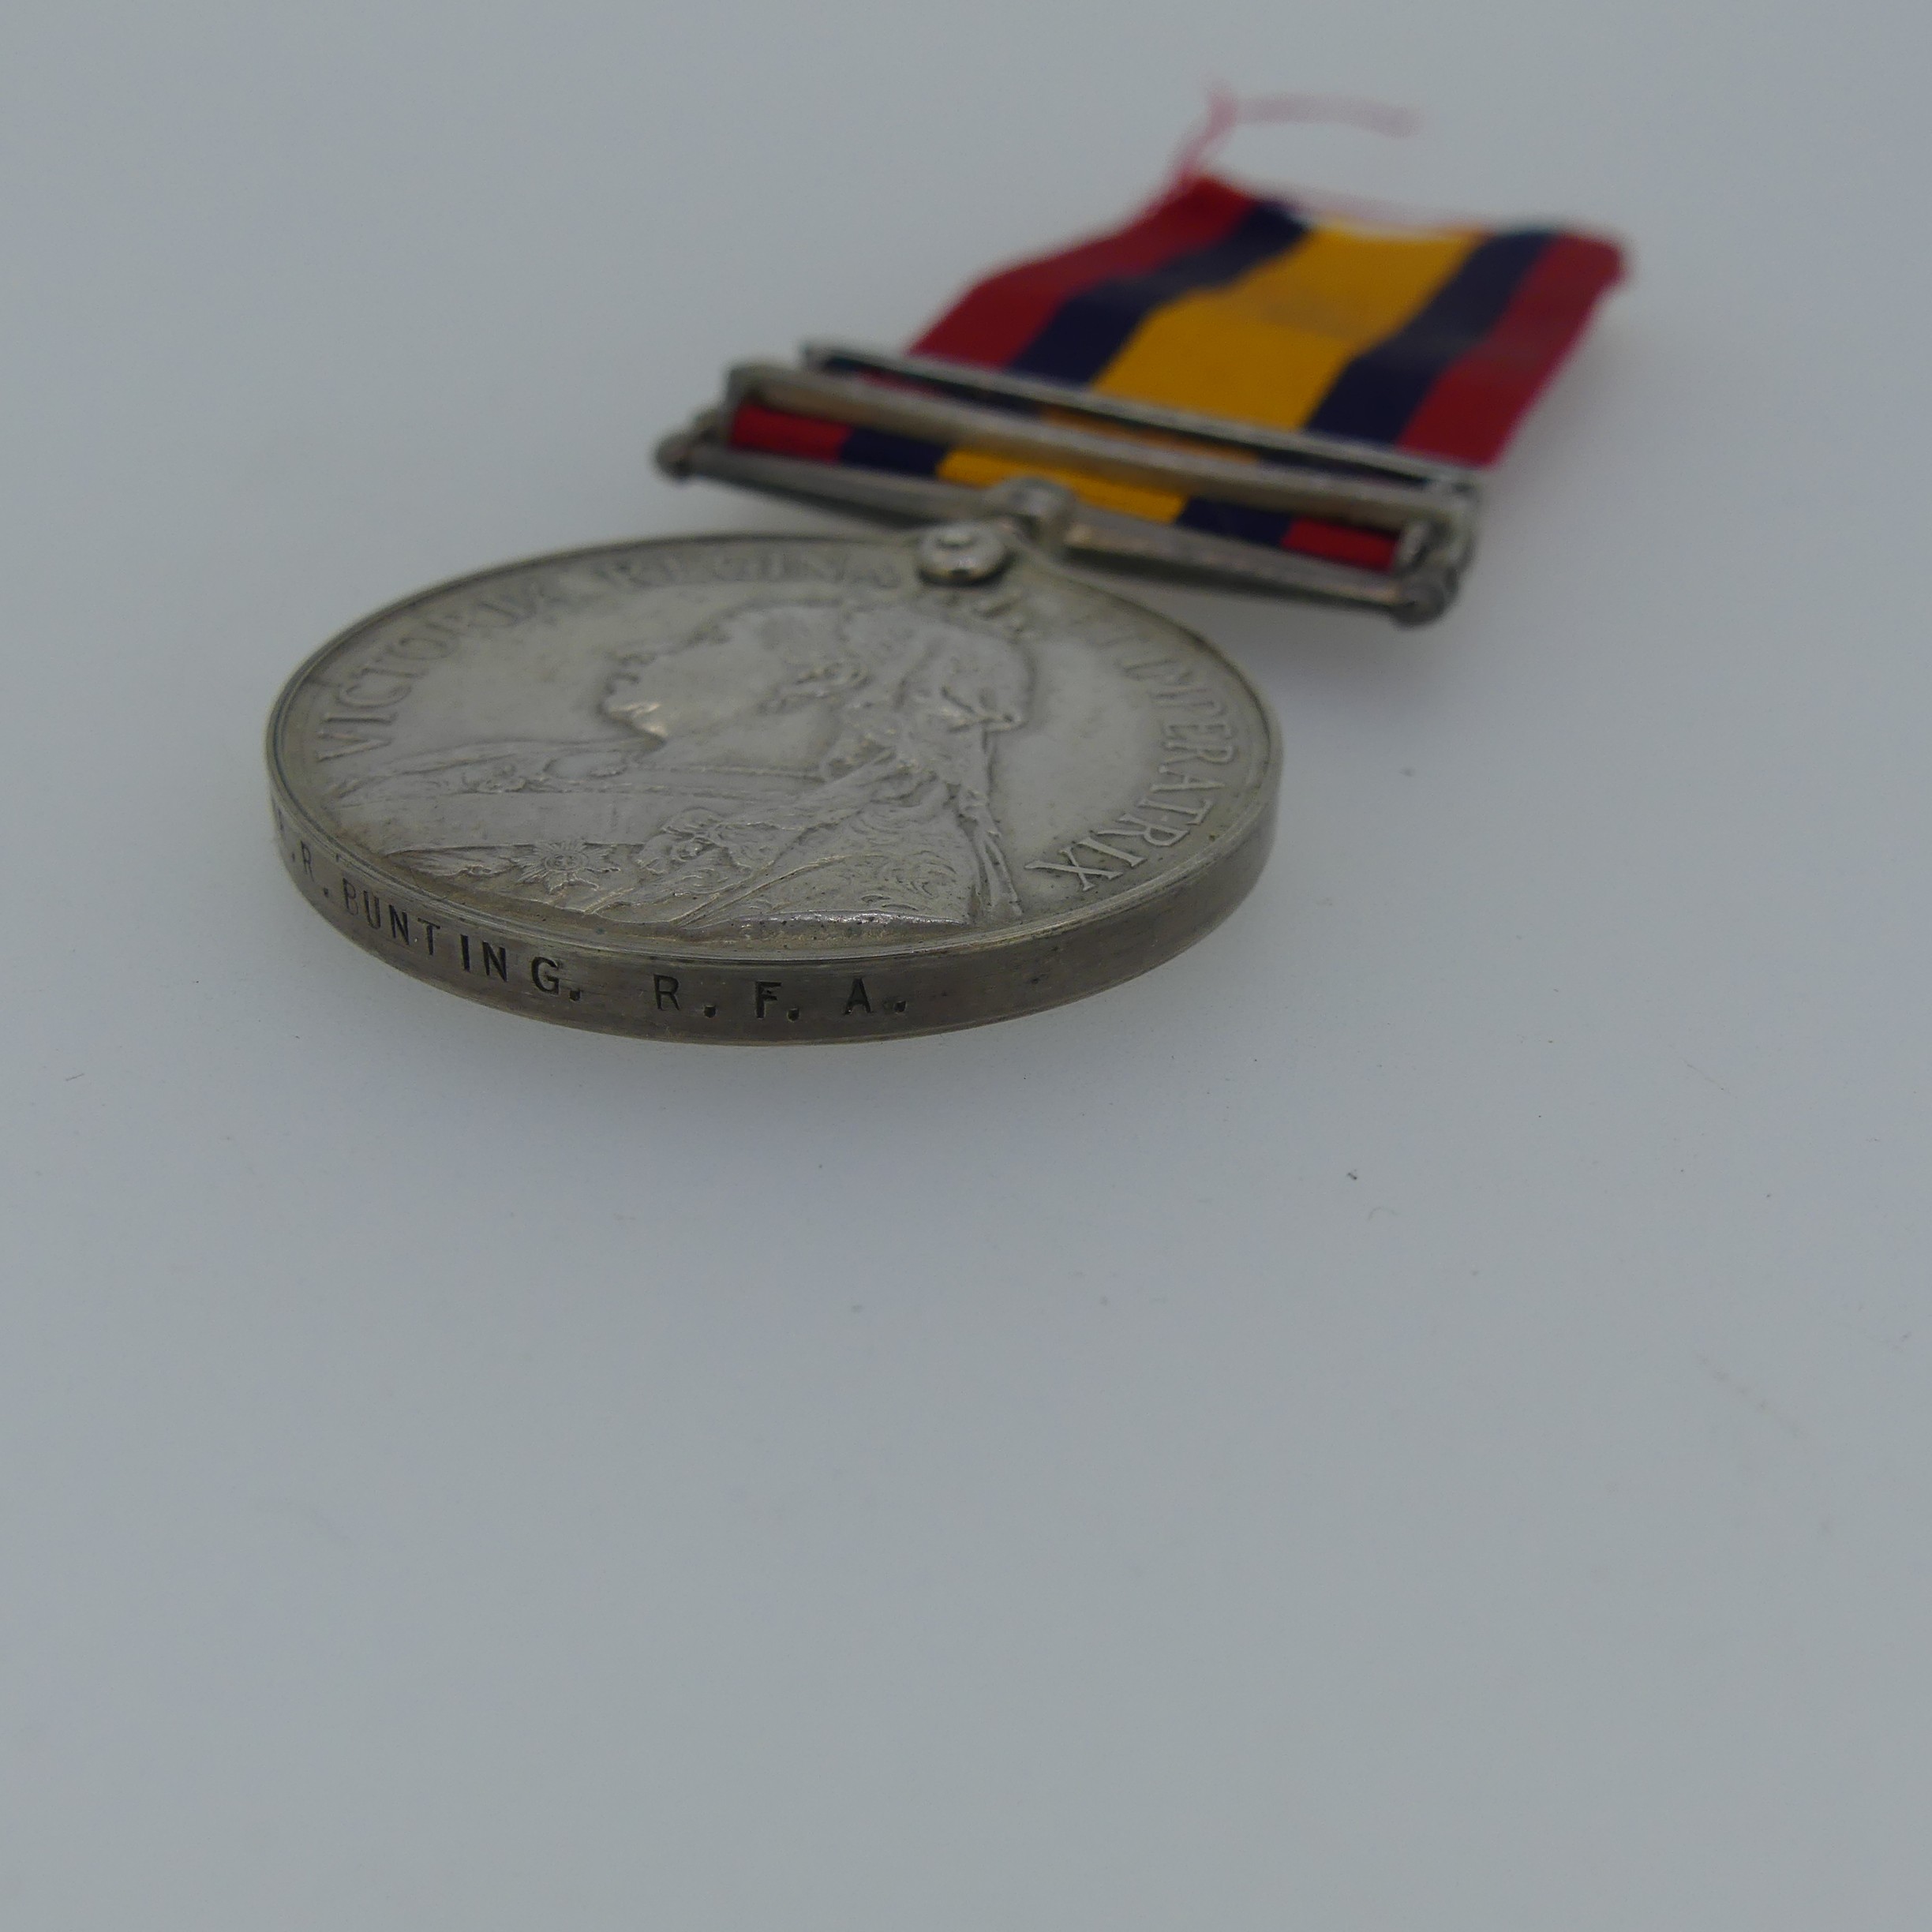 Queen's South Africa Medal (two clasps: Transvaal, Cape Colony) 65776 Gnr R. Bunting R.F.A. - Image 6 of 6